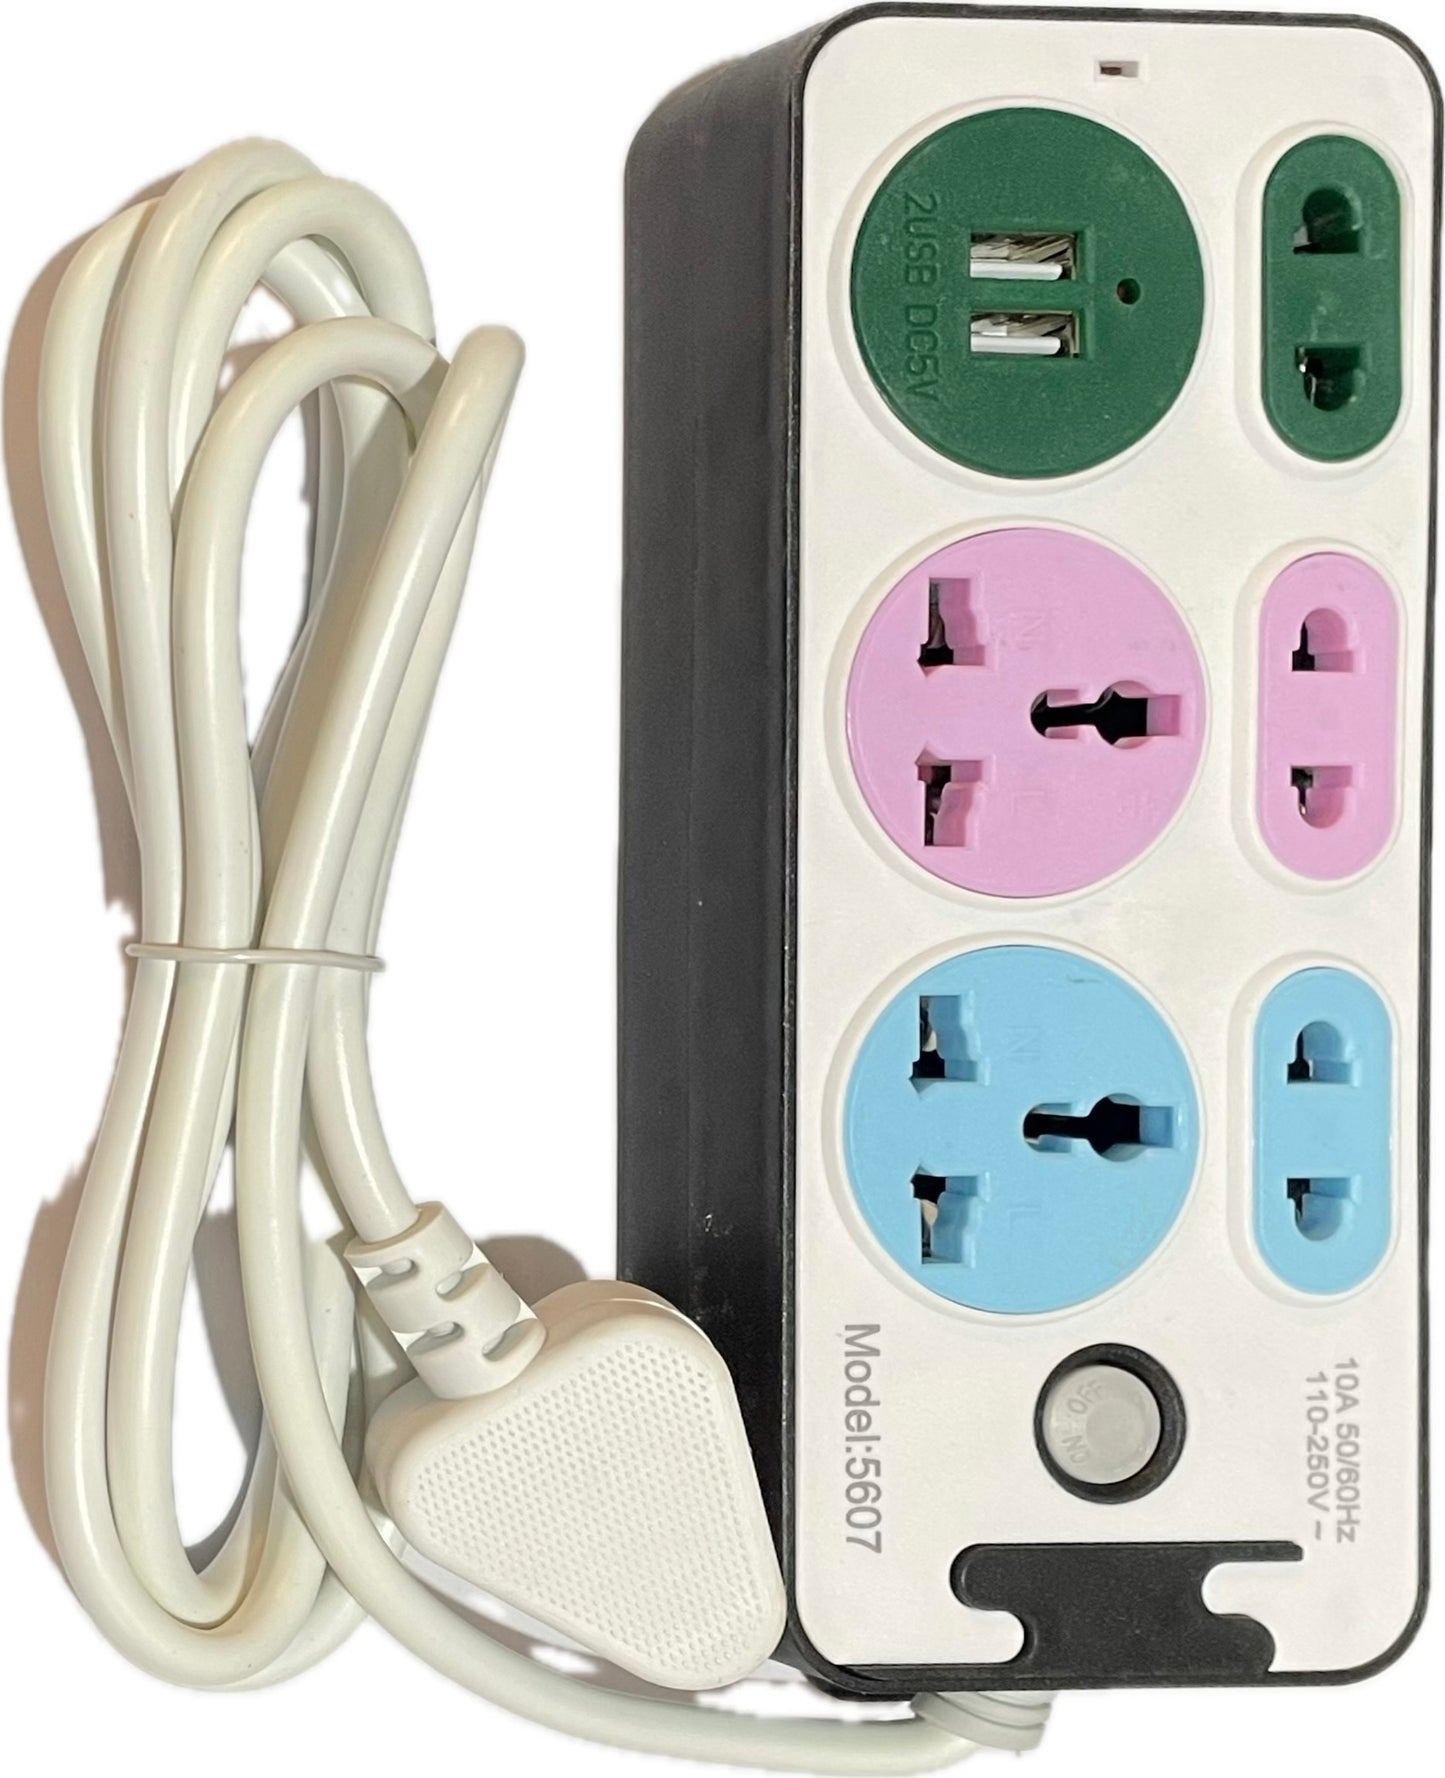 10Amp Extension Board Dual Usb Charger With Universal 2 Pin & 3 Pin Sockets 3 ft wire with with 3 Pin Plug